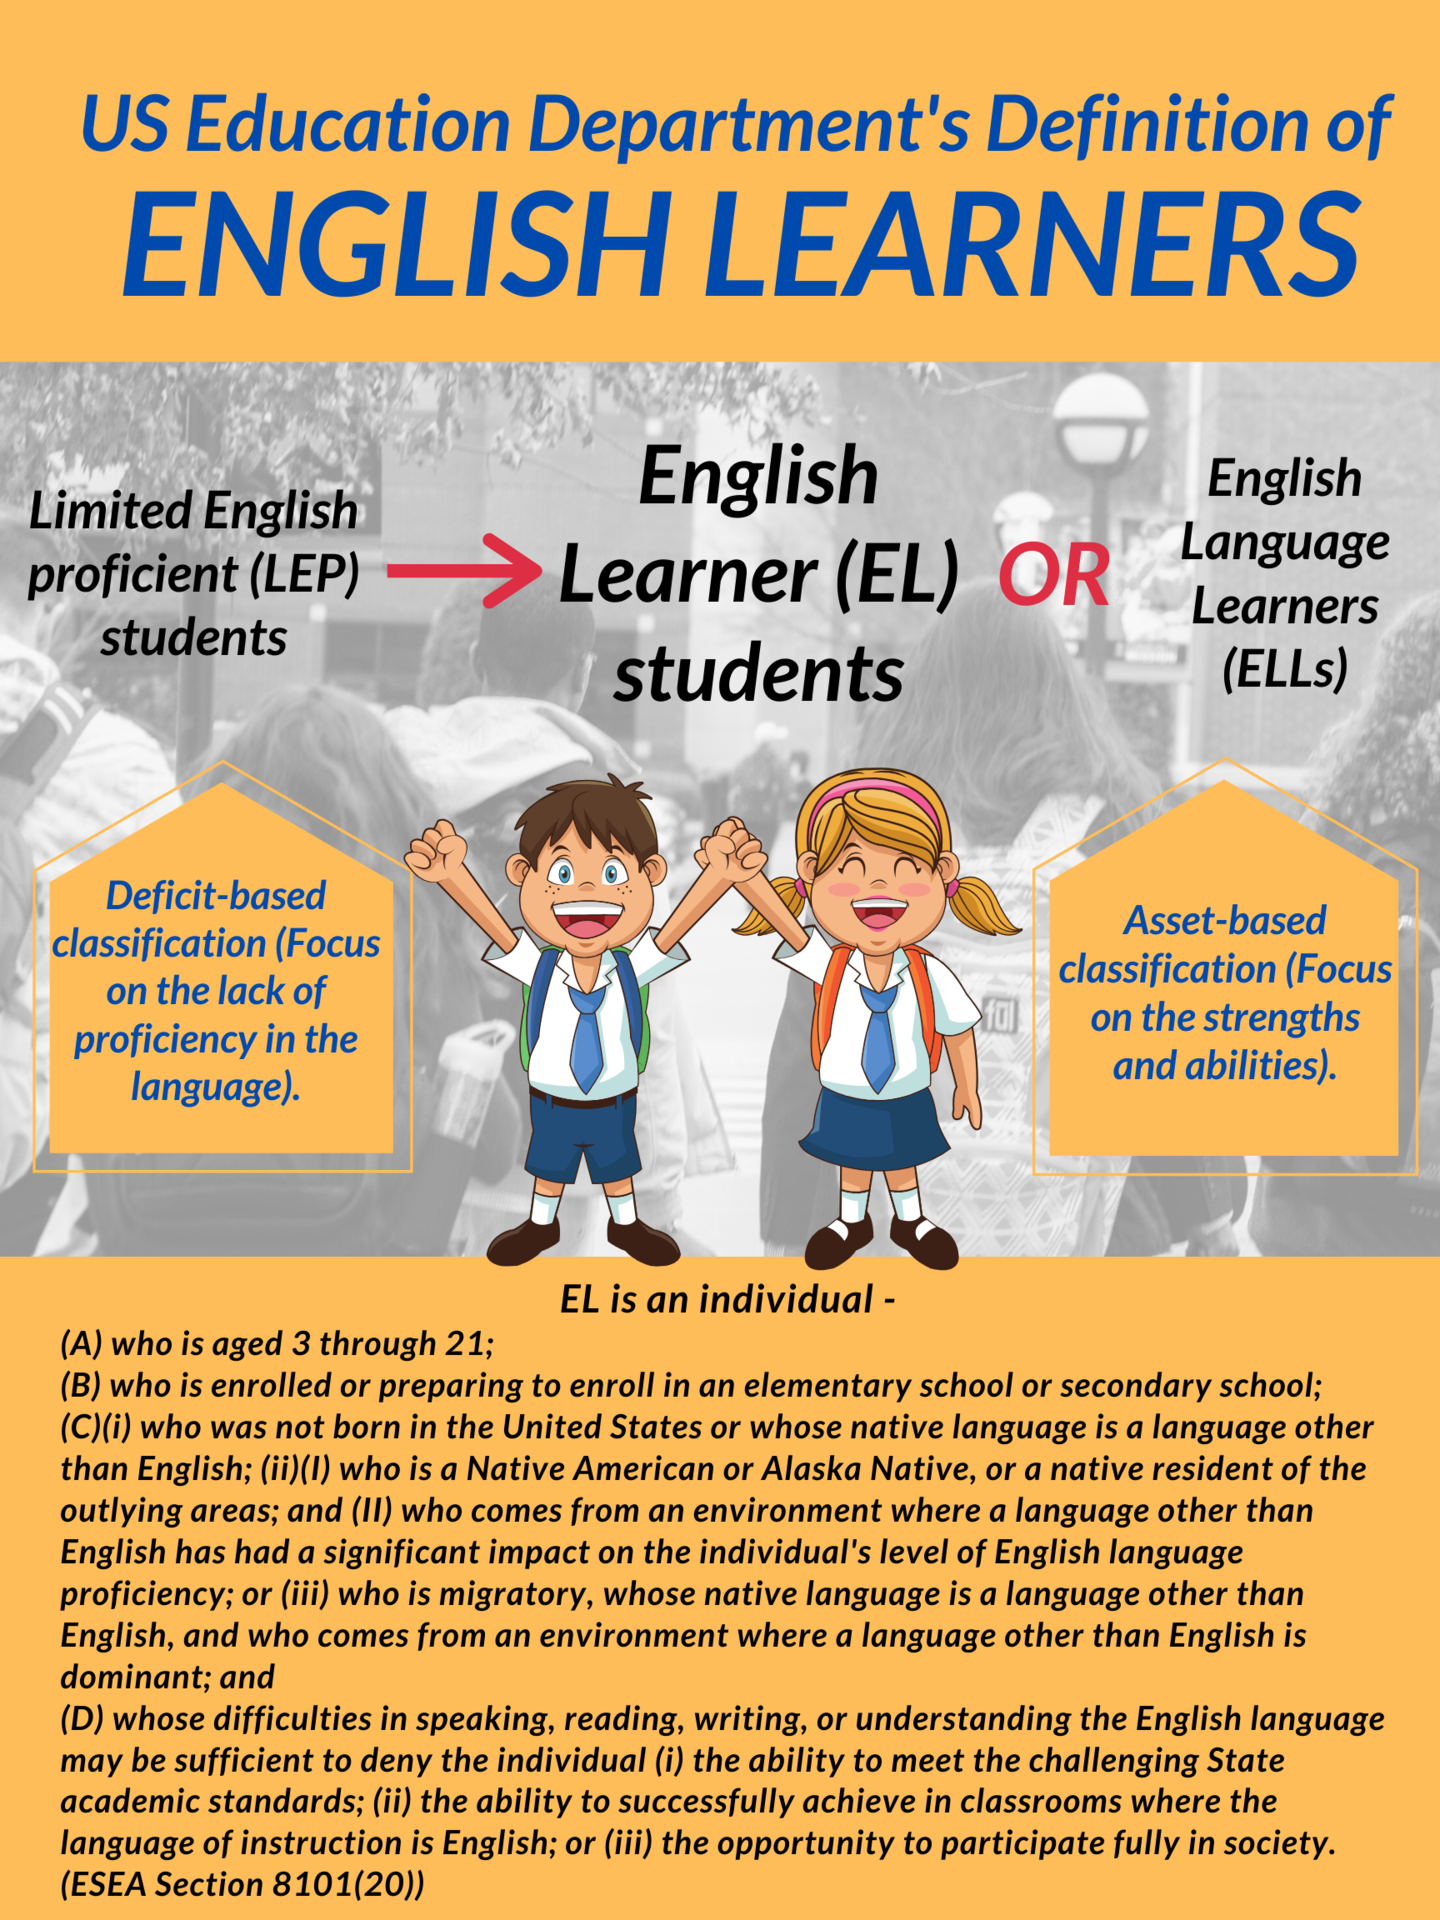 US Education Department's Definition of English Learners